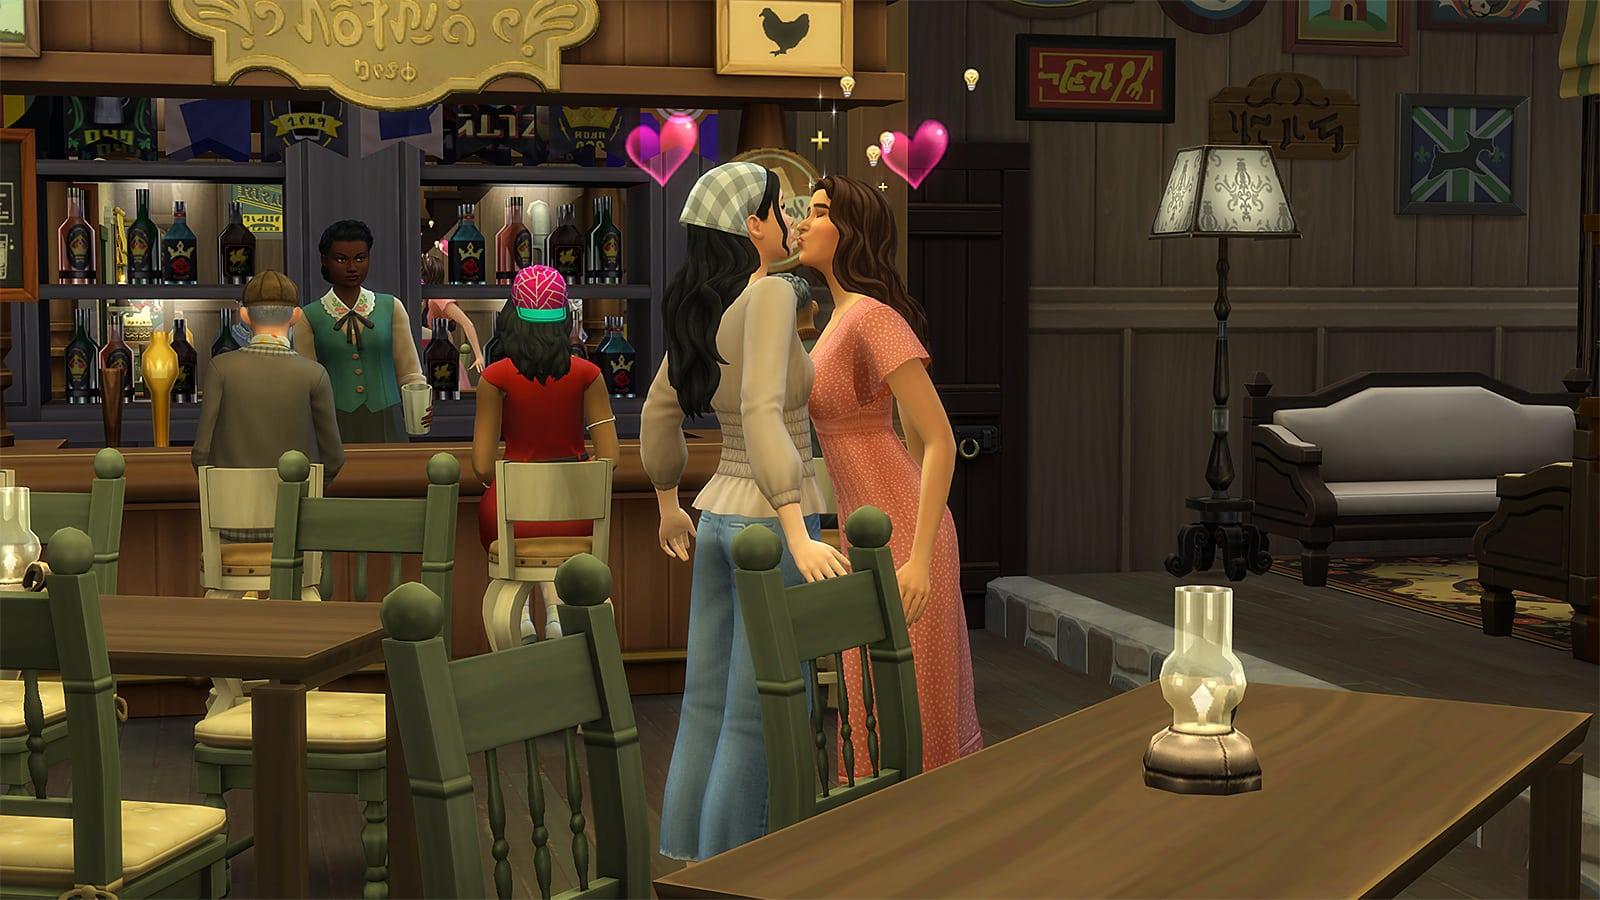 A gay couple kissing in The Sims 4